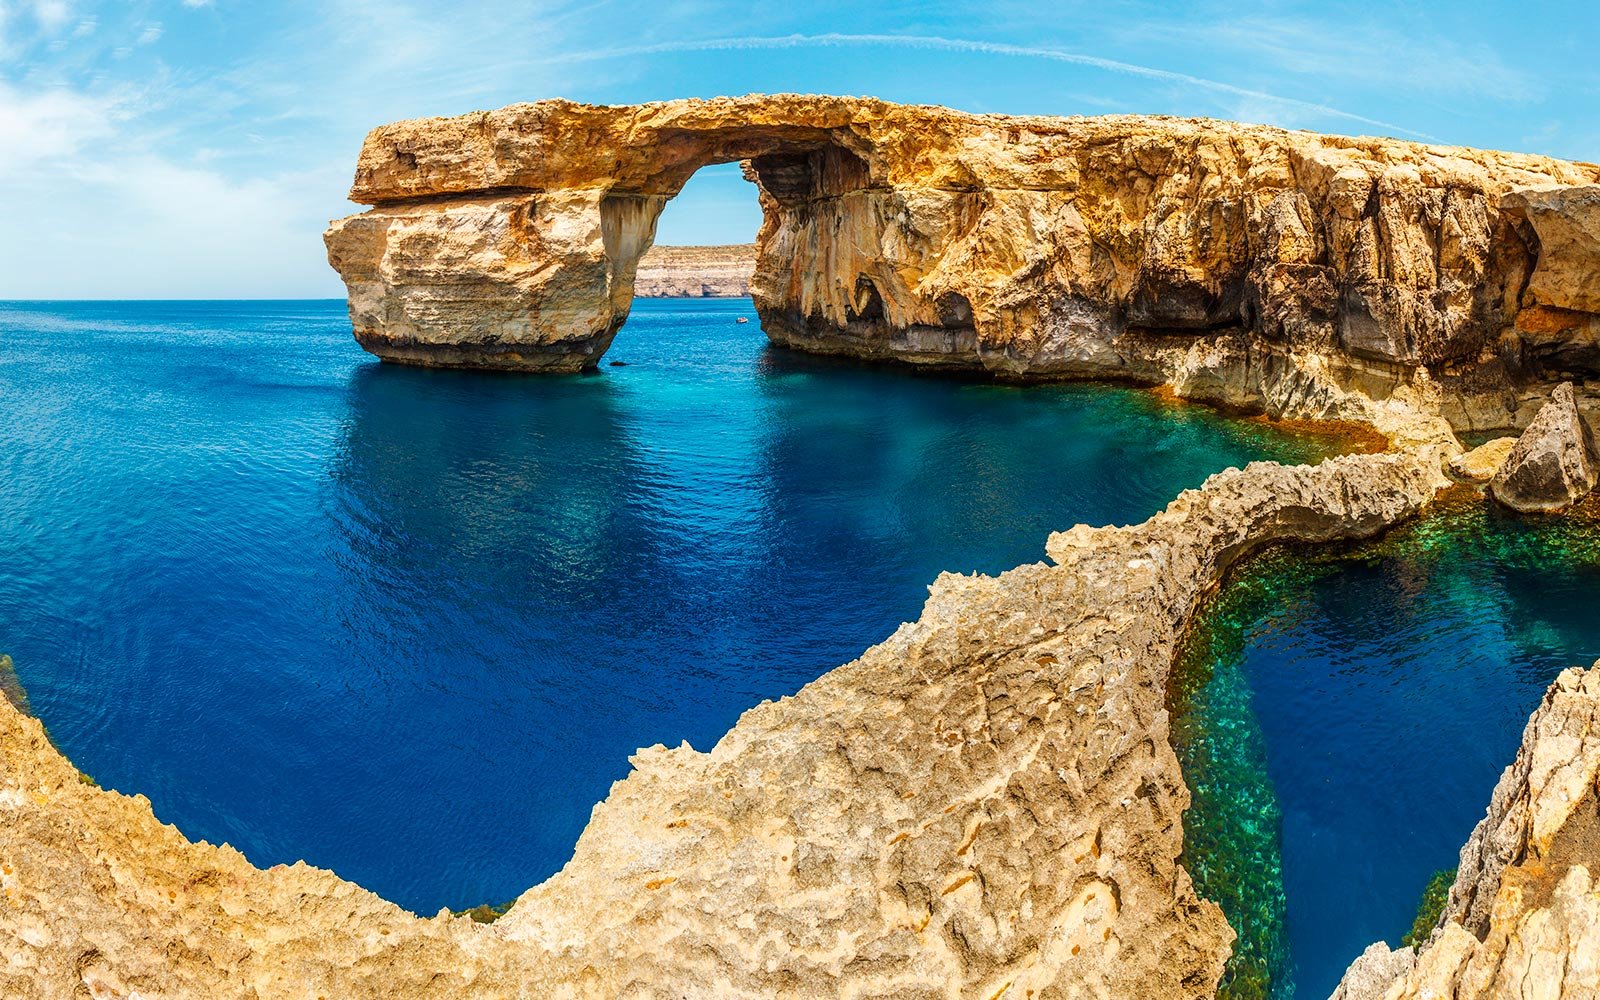 Malta-based Company Launches Stablecoin Backed by Euro: EURS 10